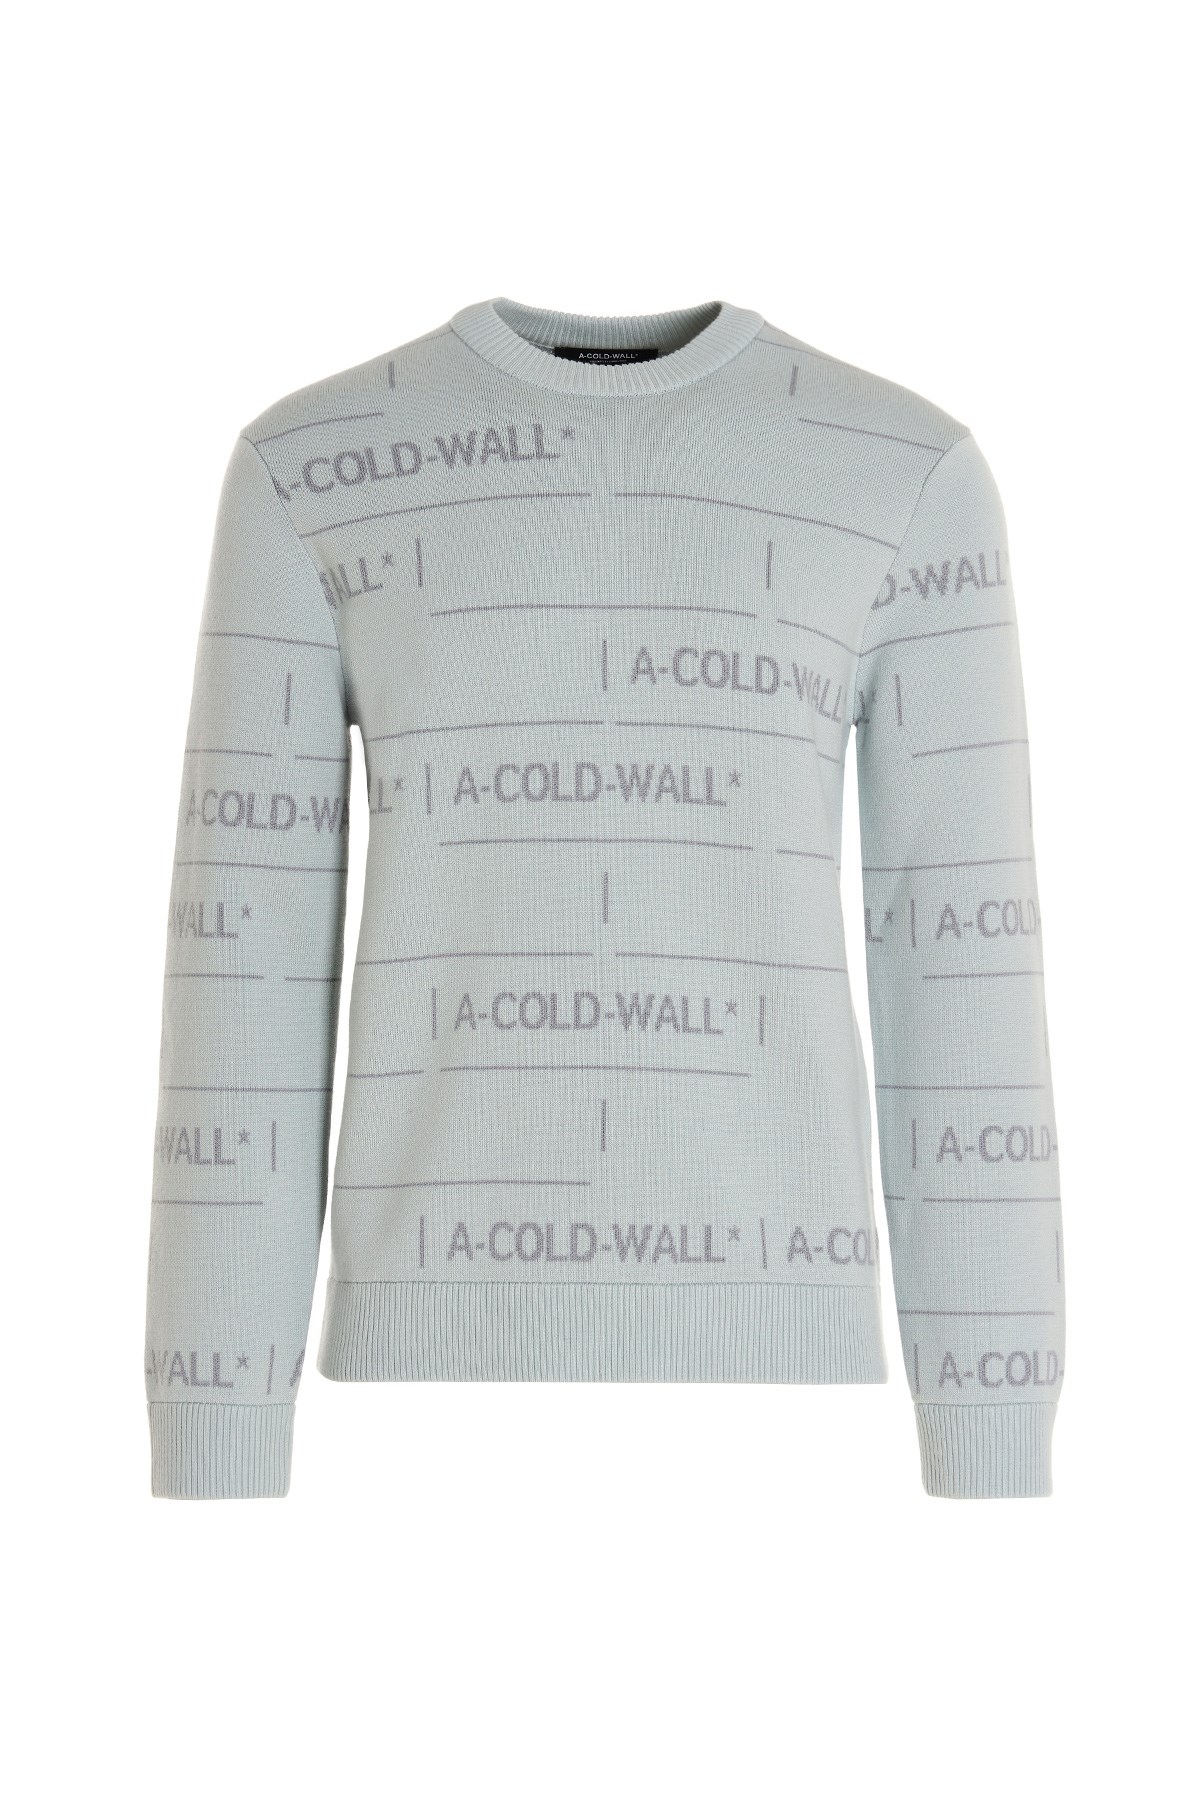 A-COLD-WALL* 'Chain Jacquard' Sweater